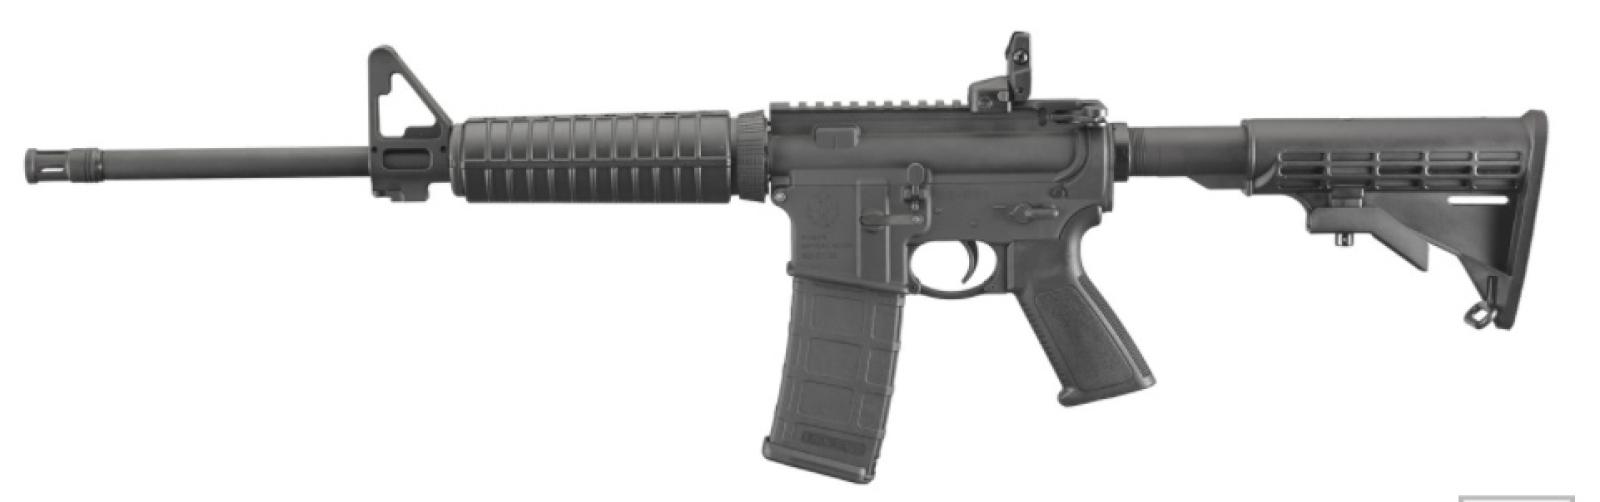 Ruger AR-556® : Standard  Model 08500  5.56 NATO - Autoloading Rifle Right Side